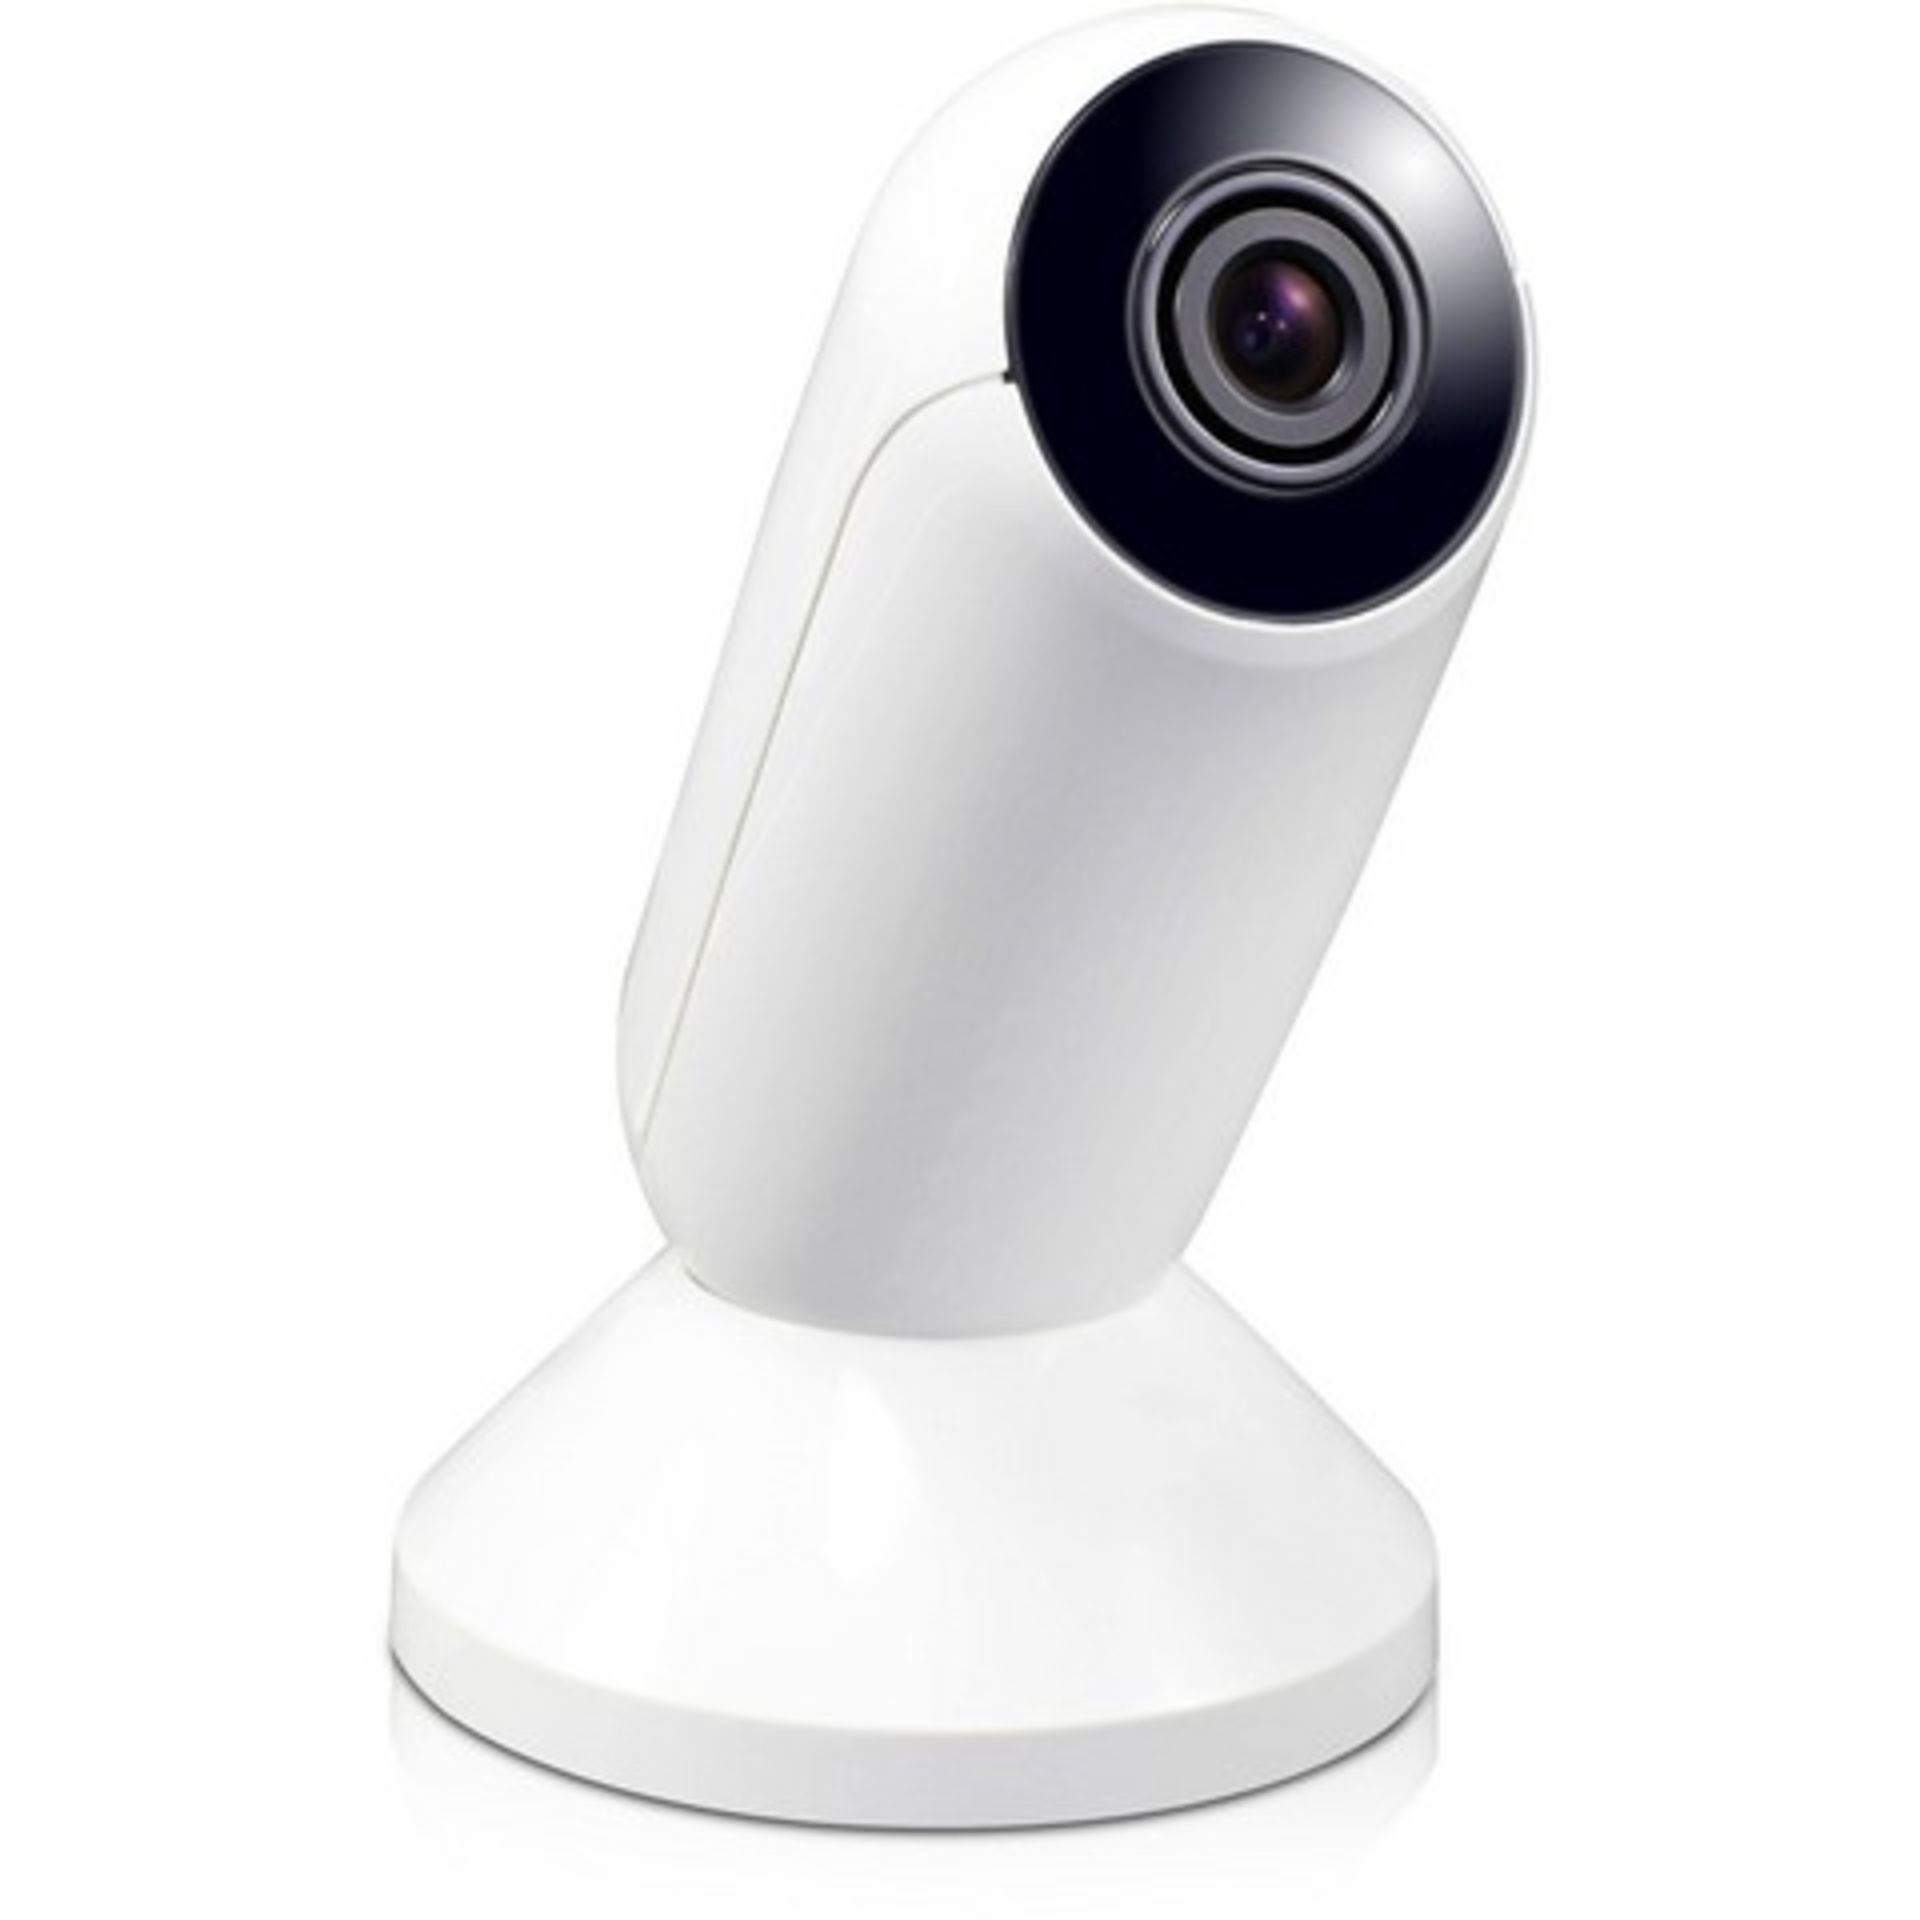 + VAT Grade A Swann One SoundView Indoor Camera - Wirelessly Records HD Video And Detects Specific